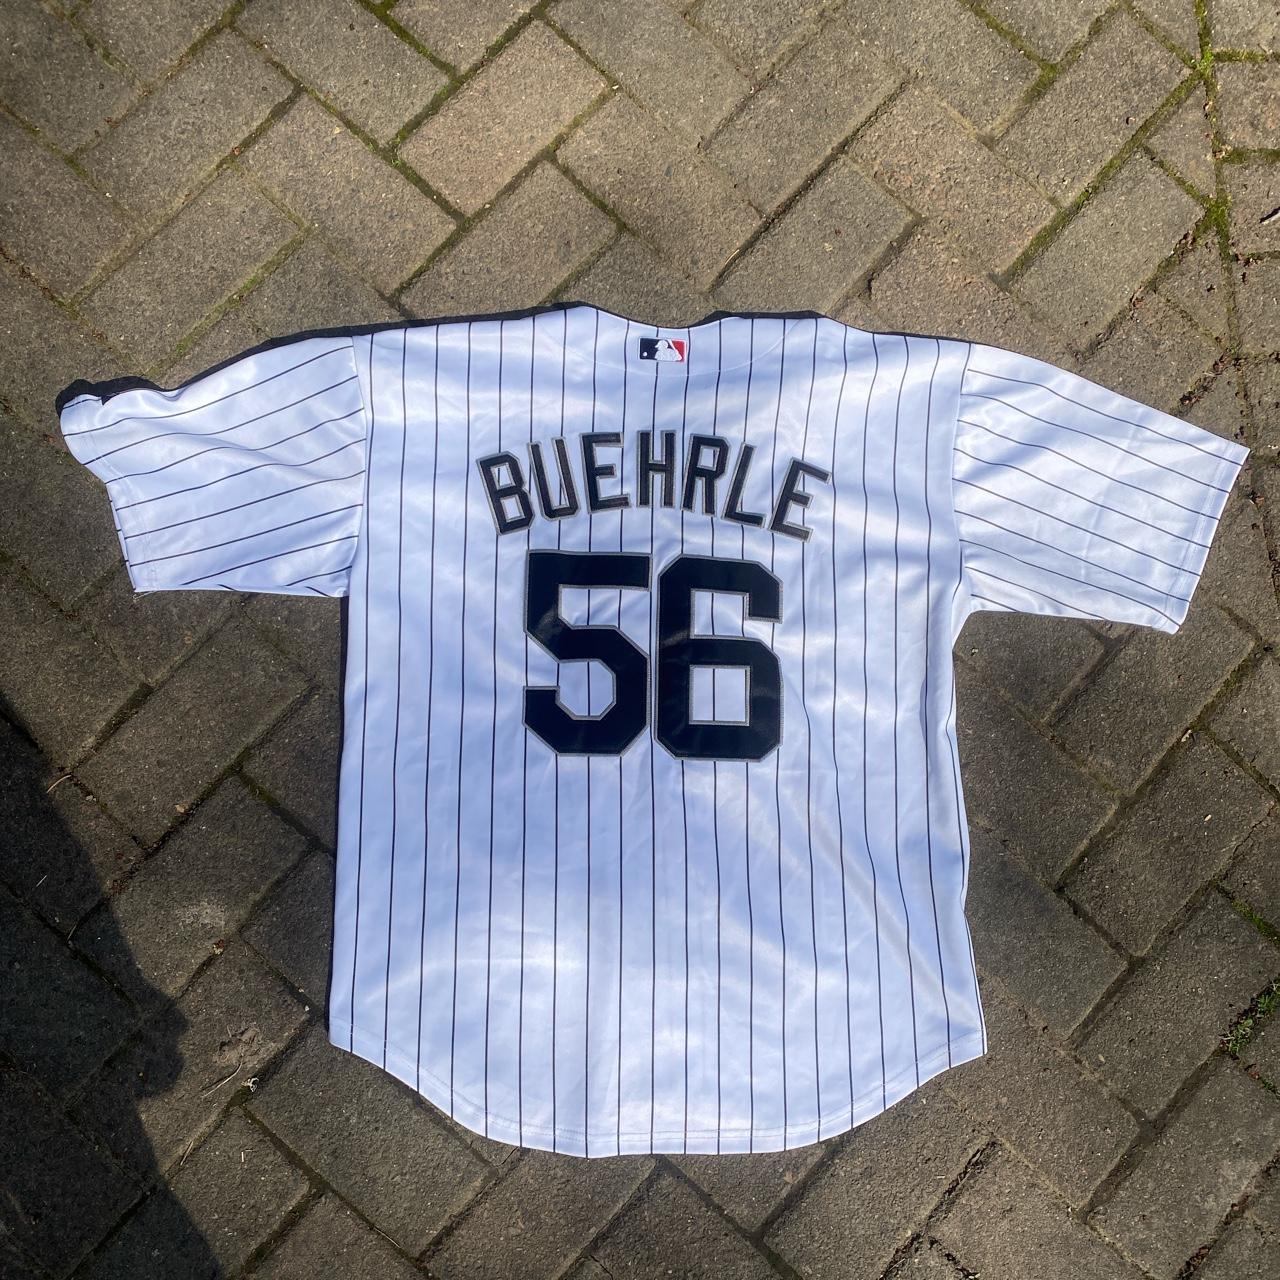 Mark Buehrle Signed Jersey. Brand new Majestic Chicago White Sox